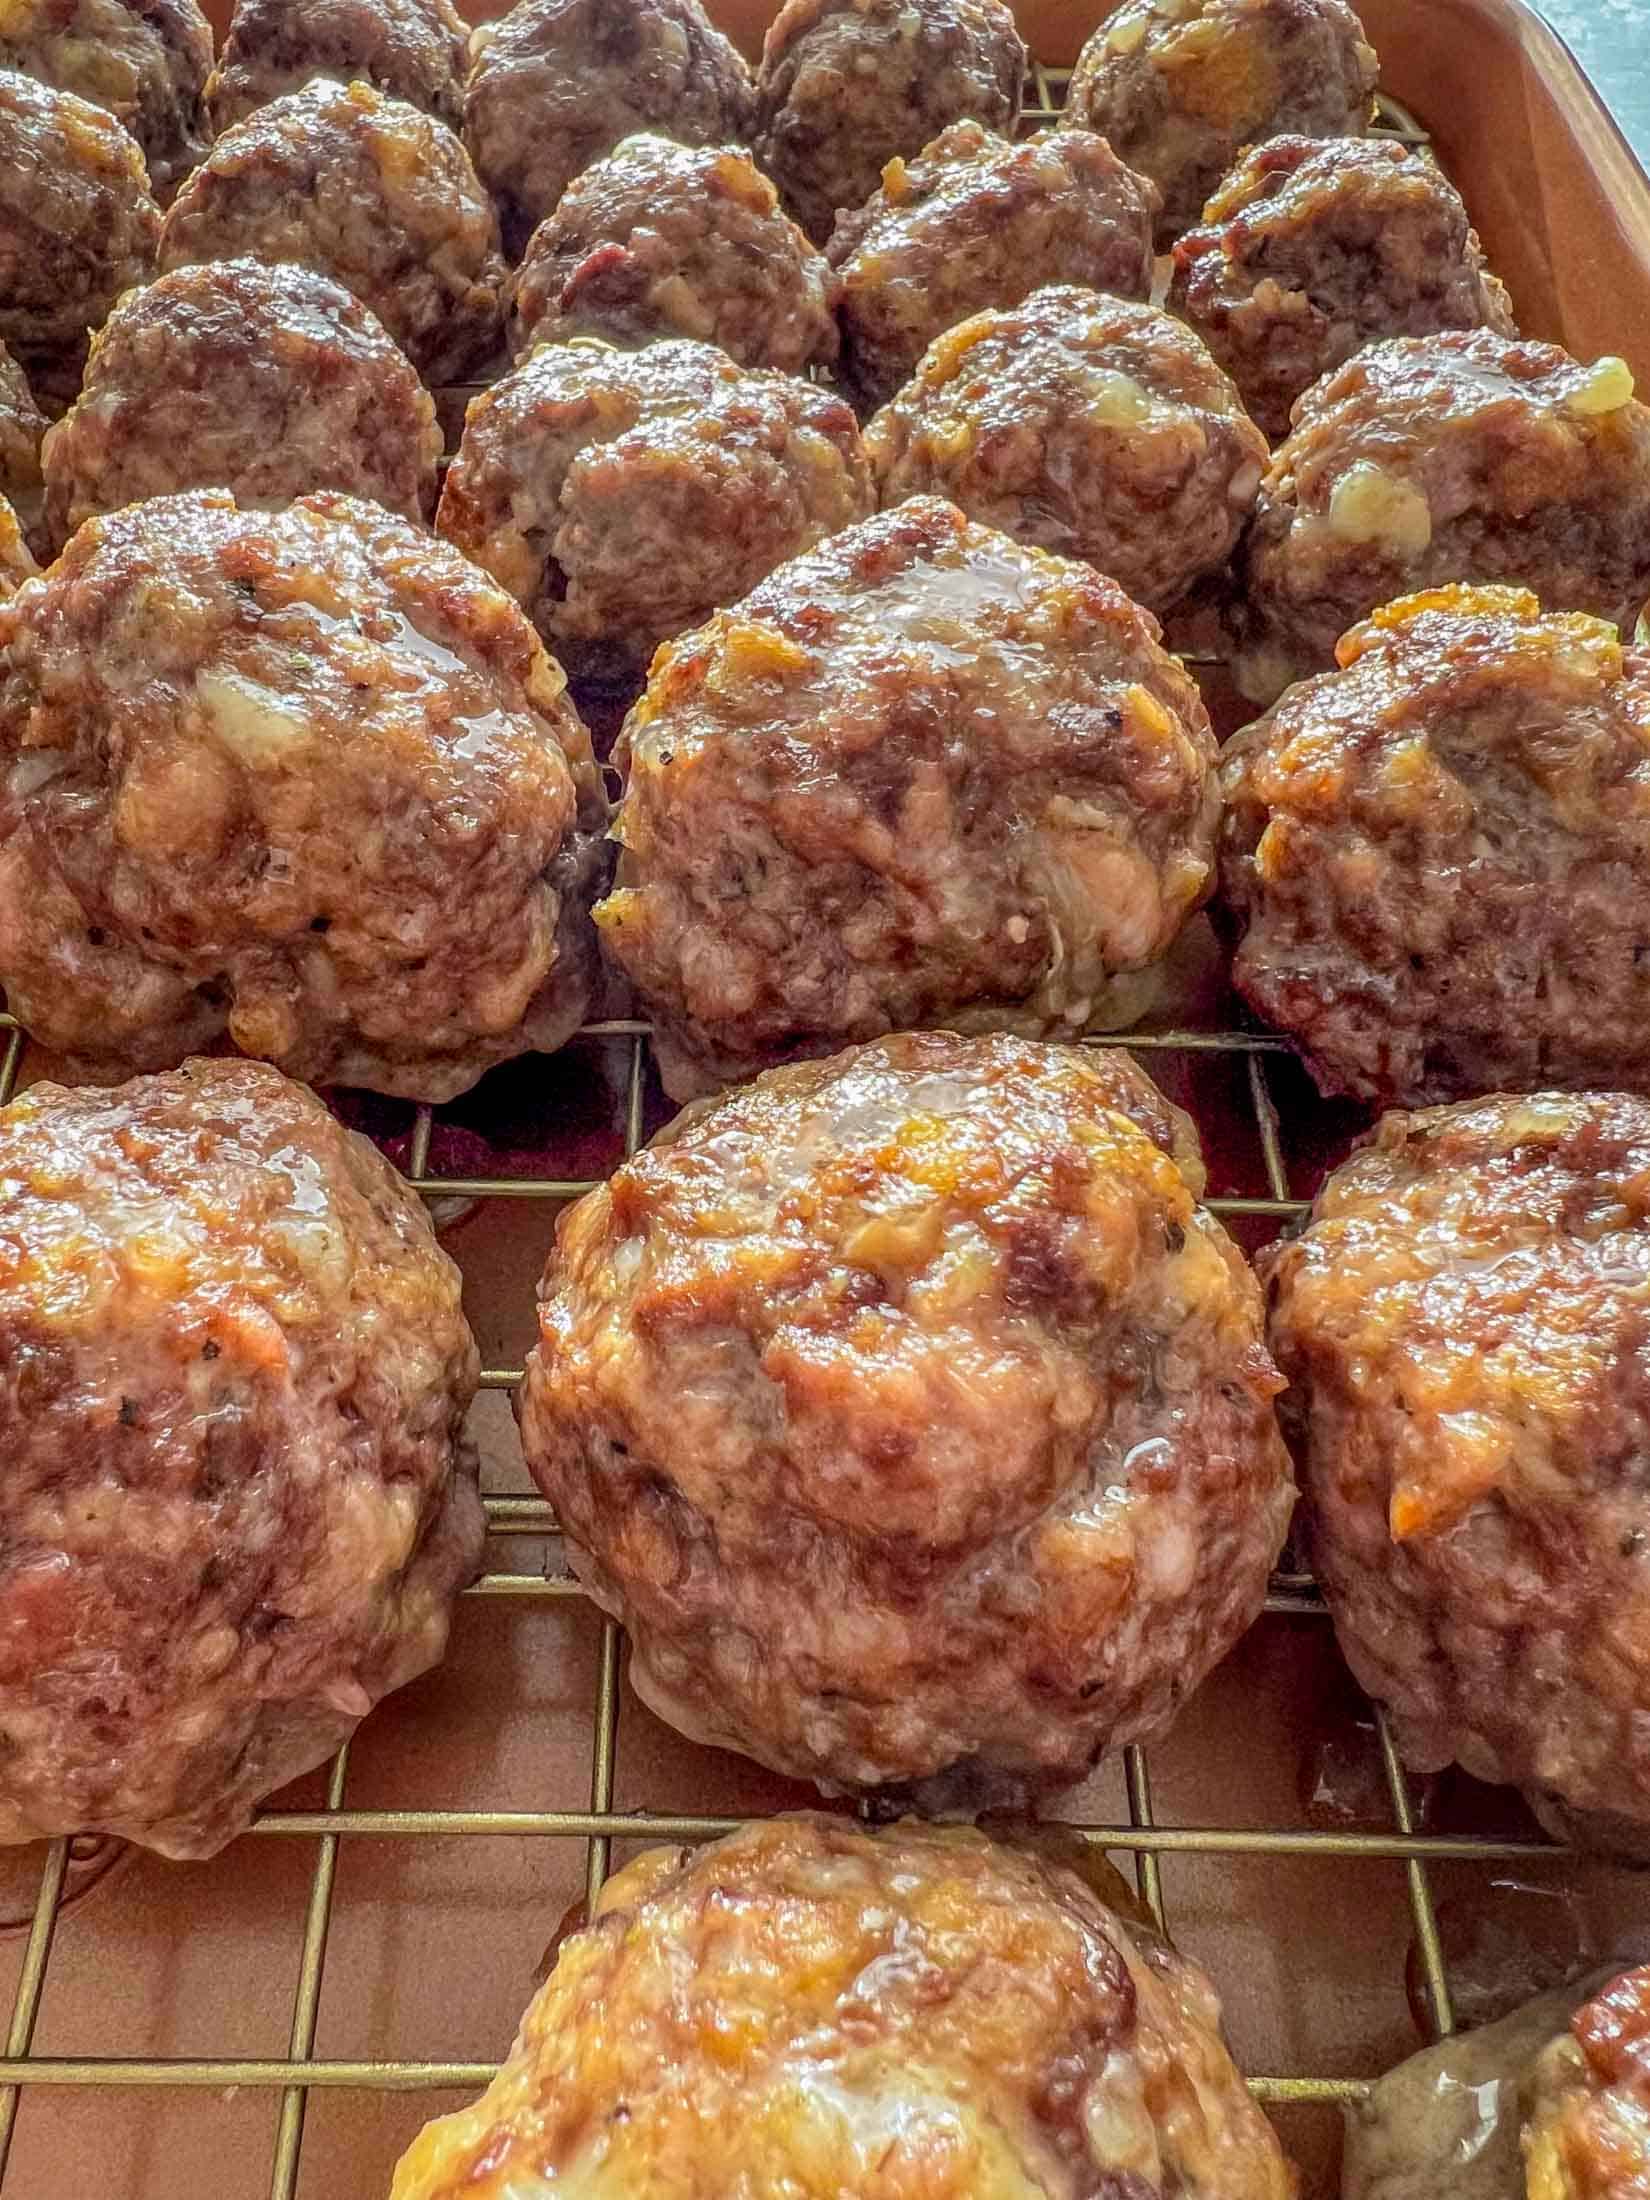 Fully cooked meatballs on a wire cooling rack inside of a baking sheet.